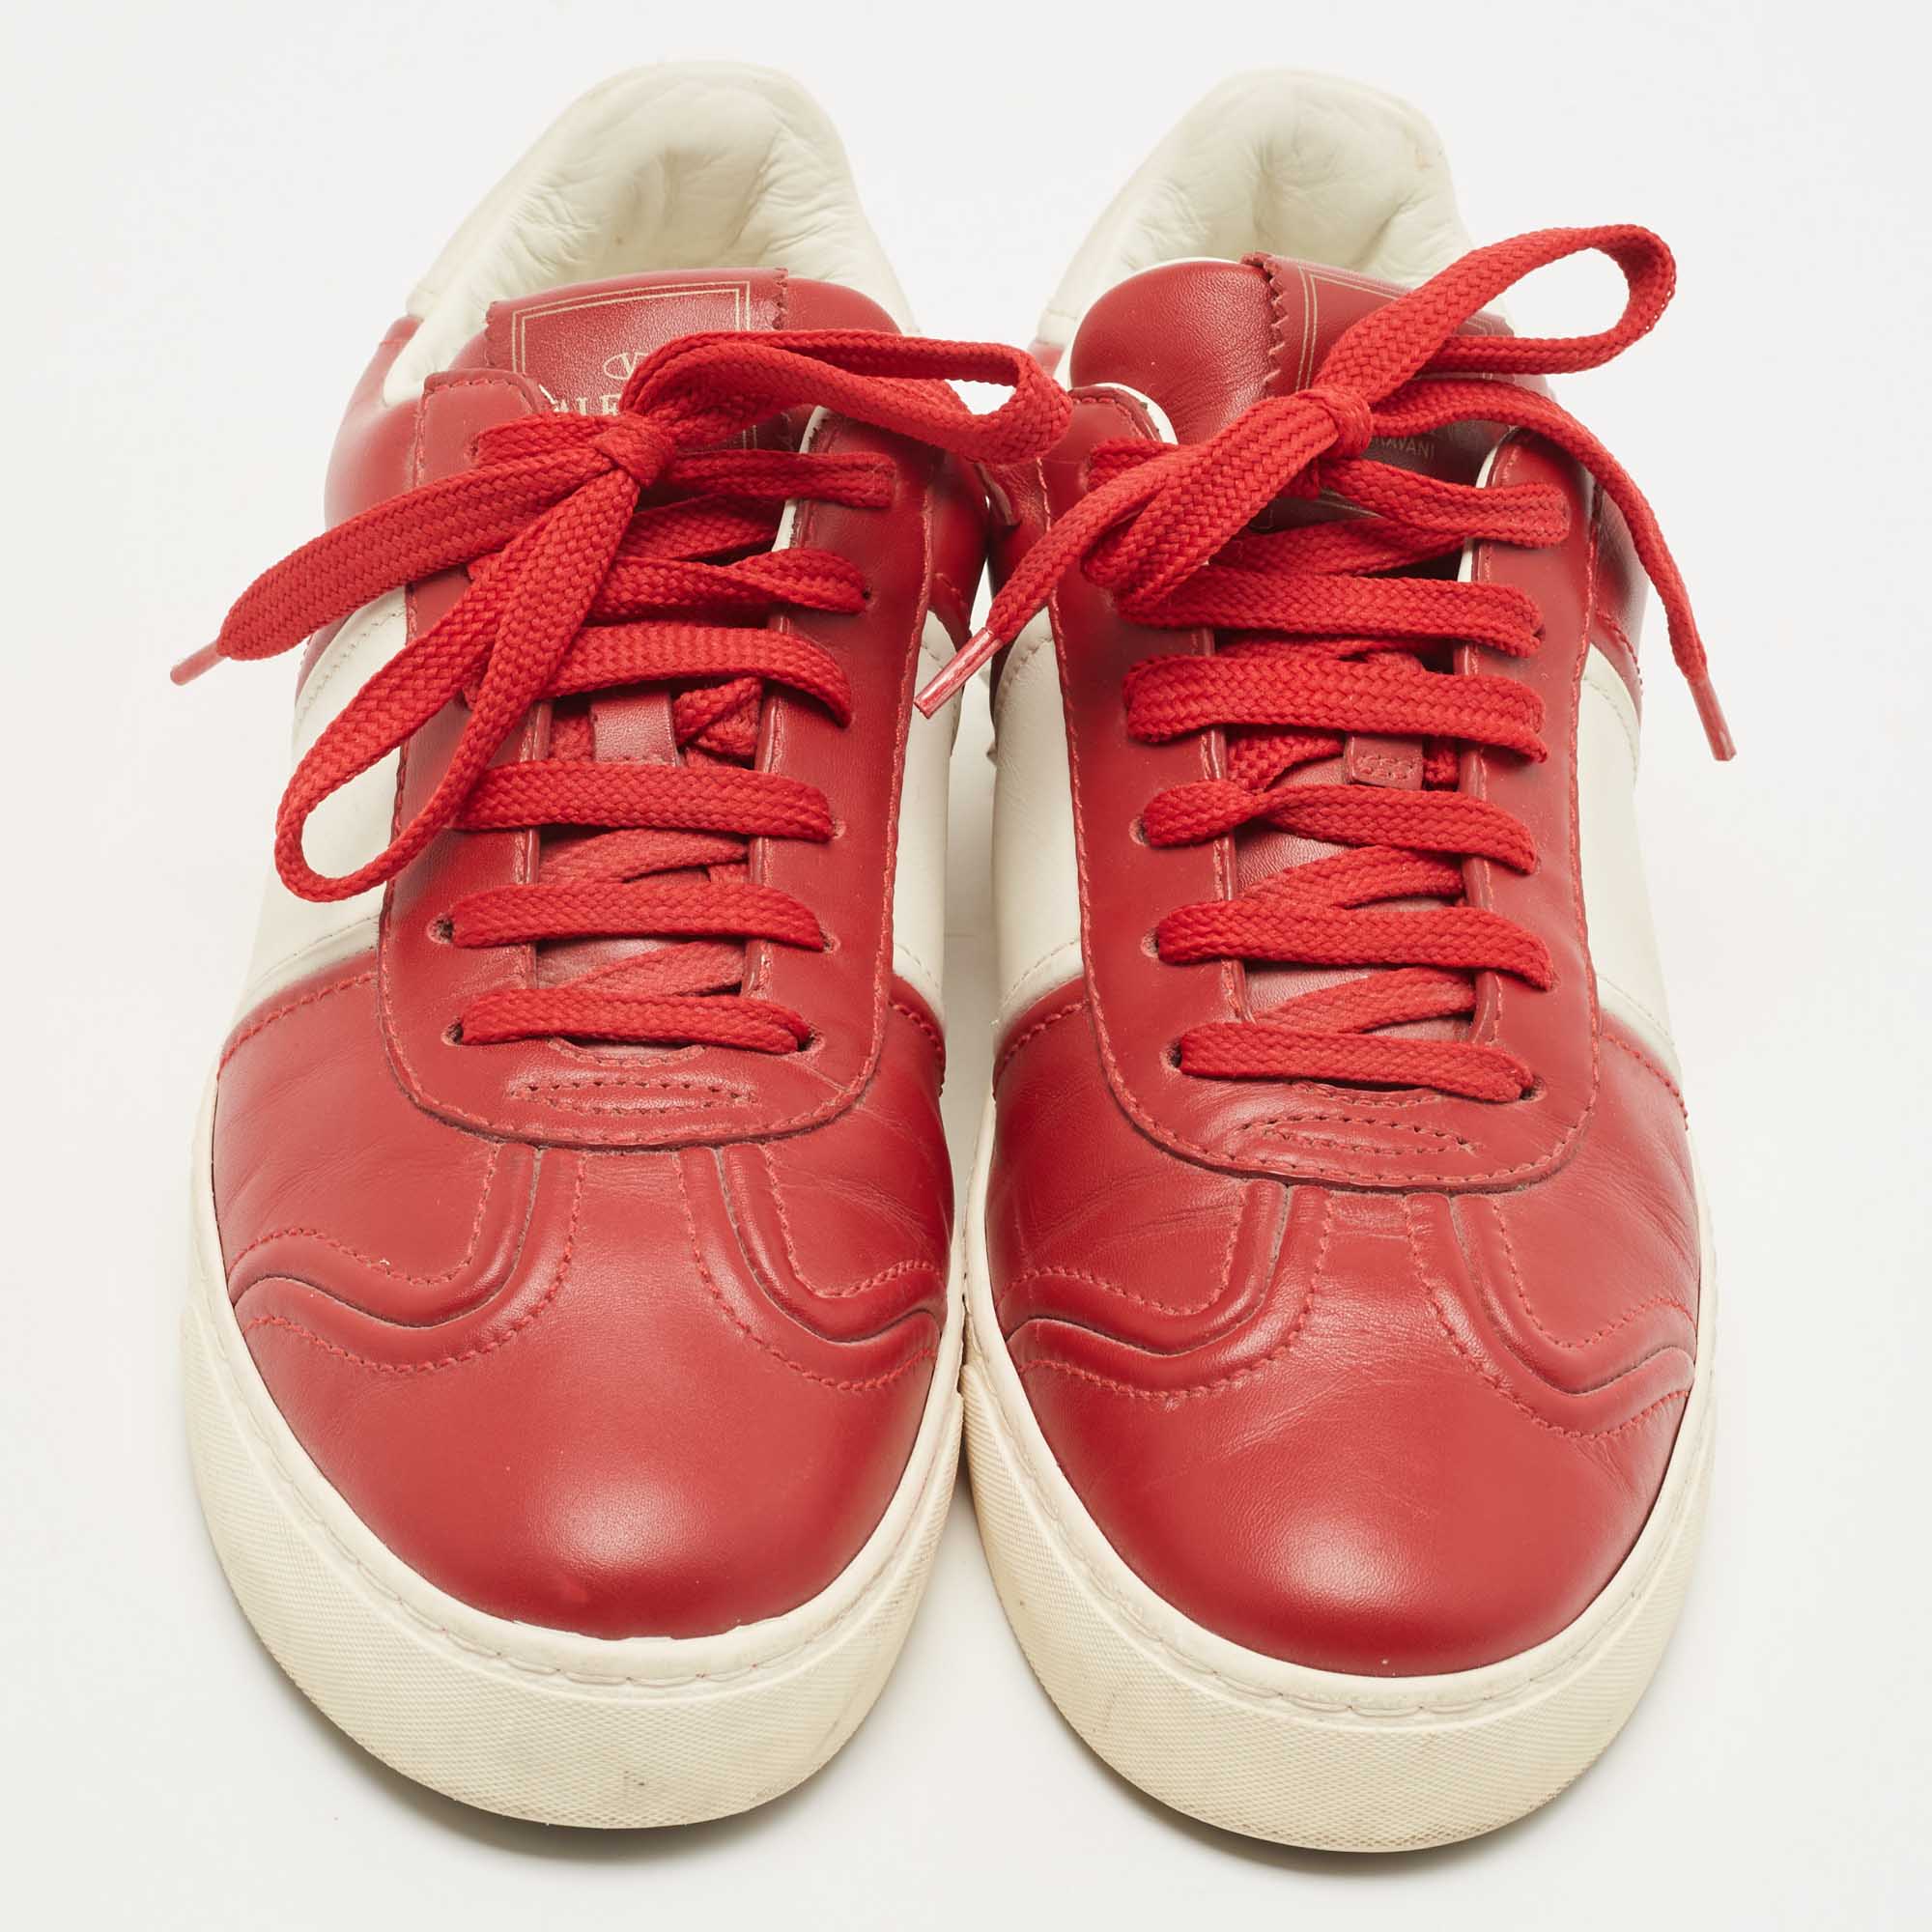 Valentino Red Leather Fly Crew Low Top Sneakers Size 38.5